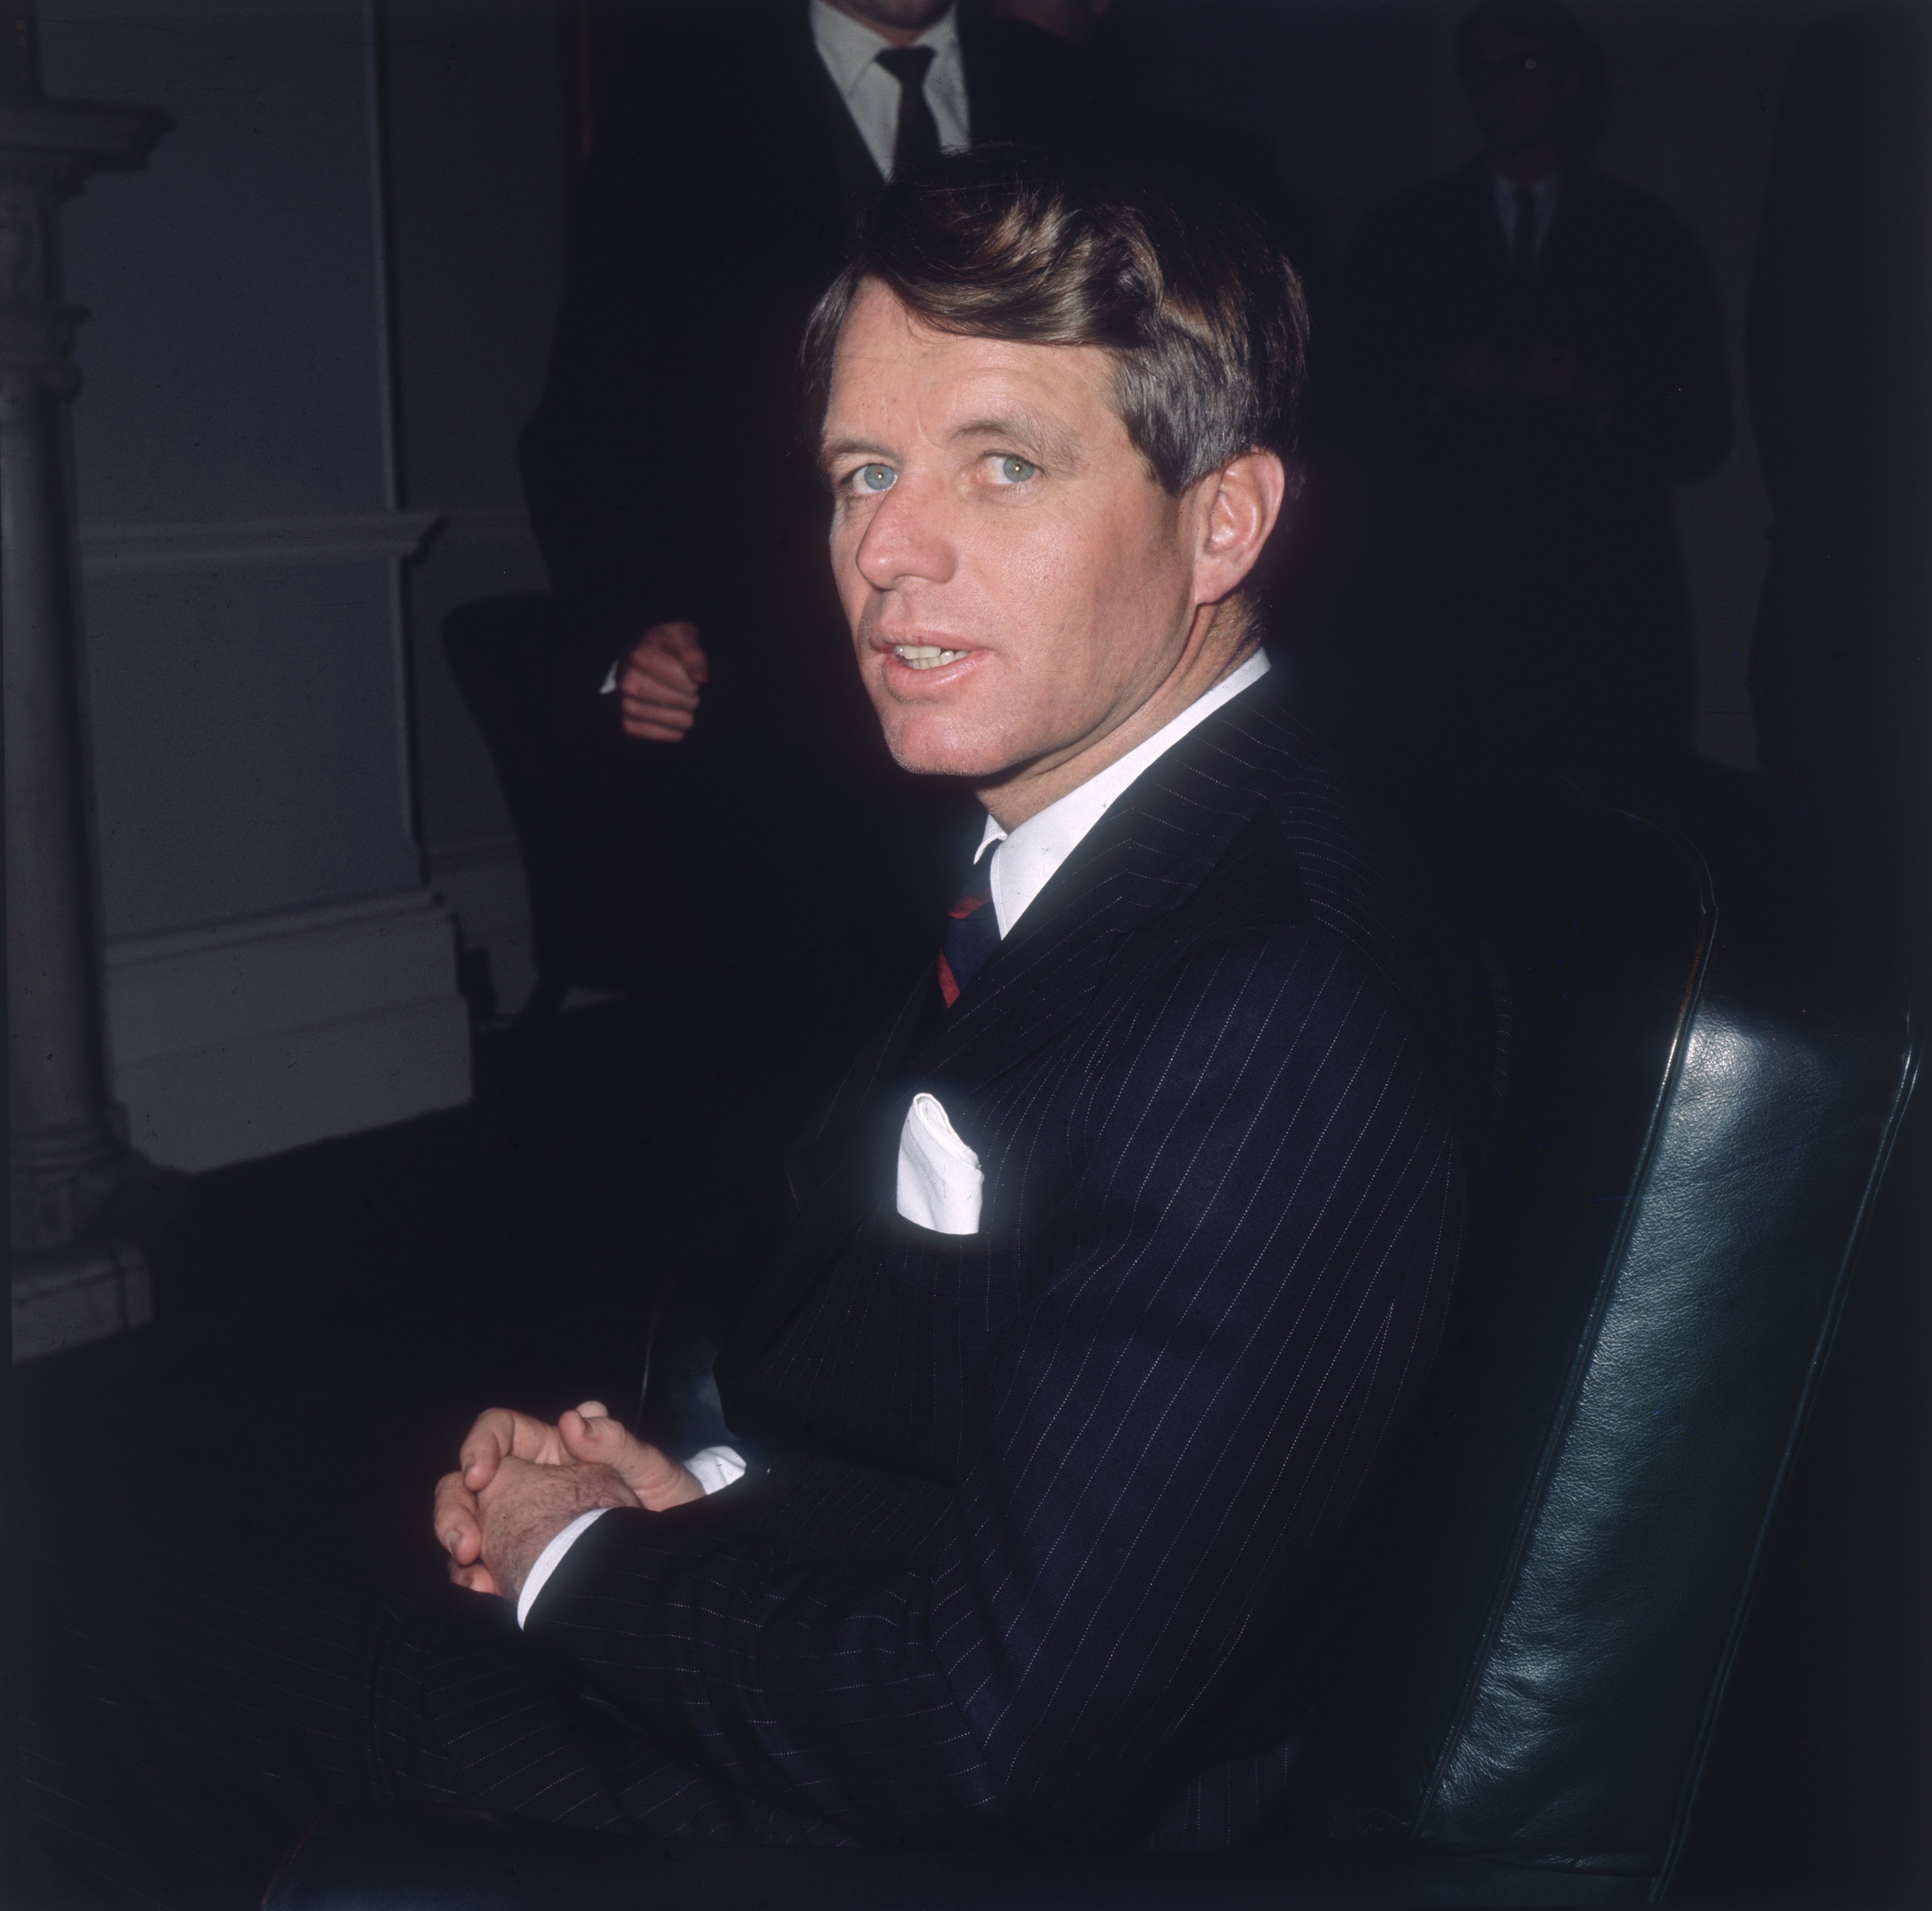 Senator Robert Kennedy (1925 - 1968), candidate for the Presidential nomination of the Democratic Party and brother of the late President John F Kennedy, during a visit to London, May 1967 | Photo: Getty Images